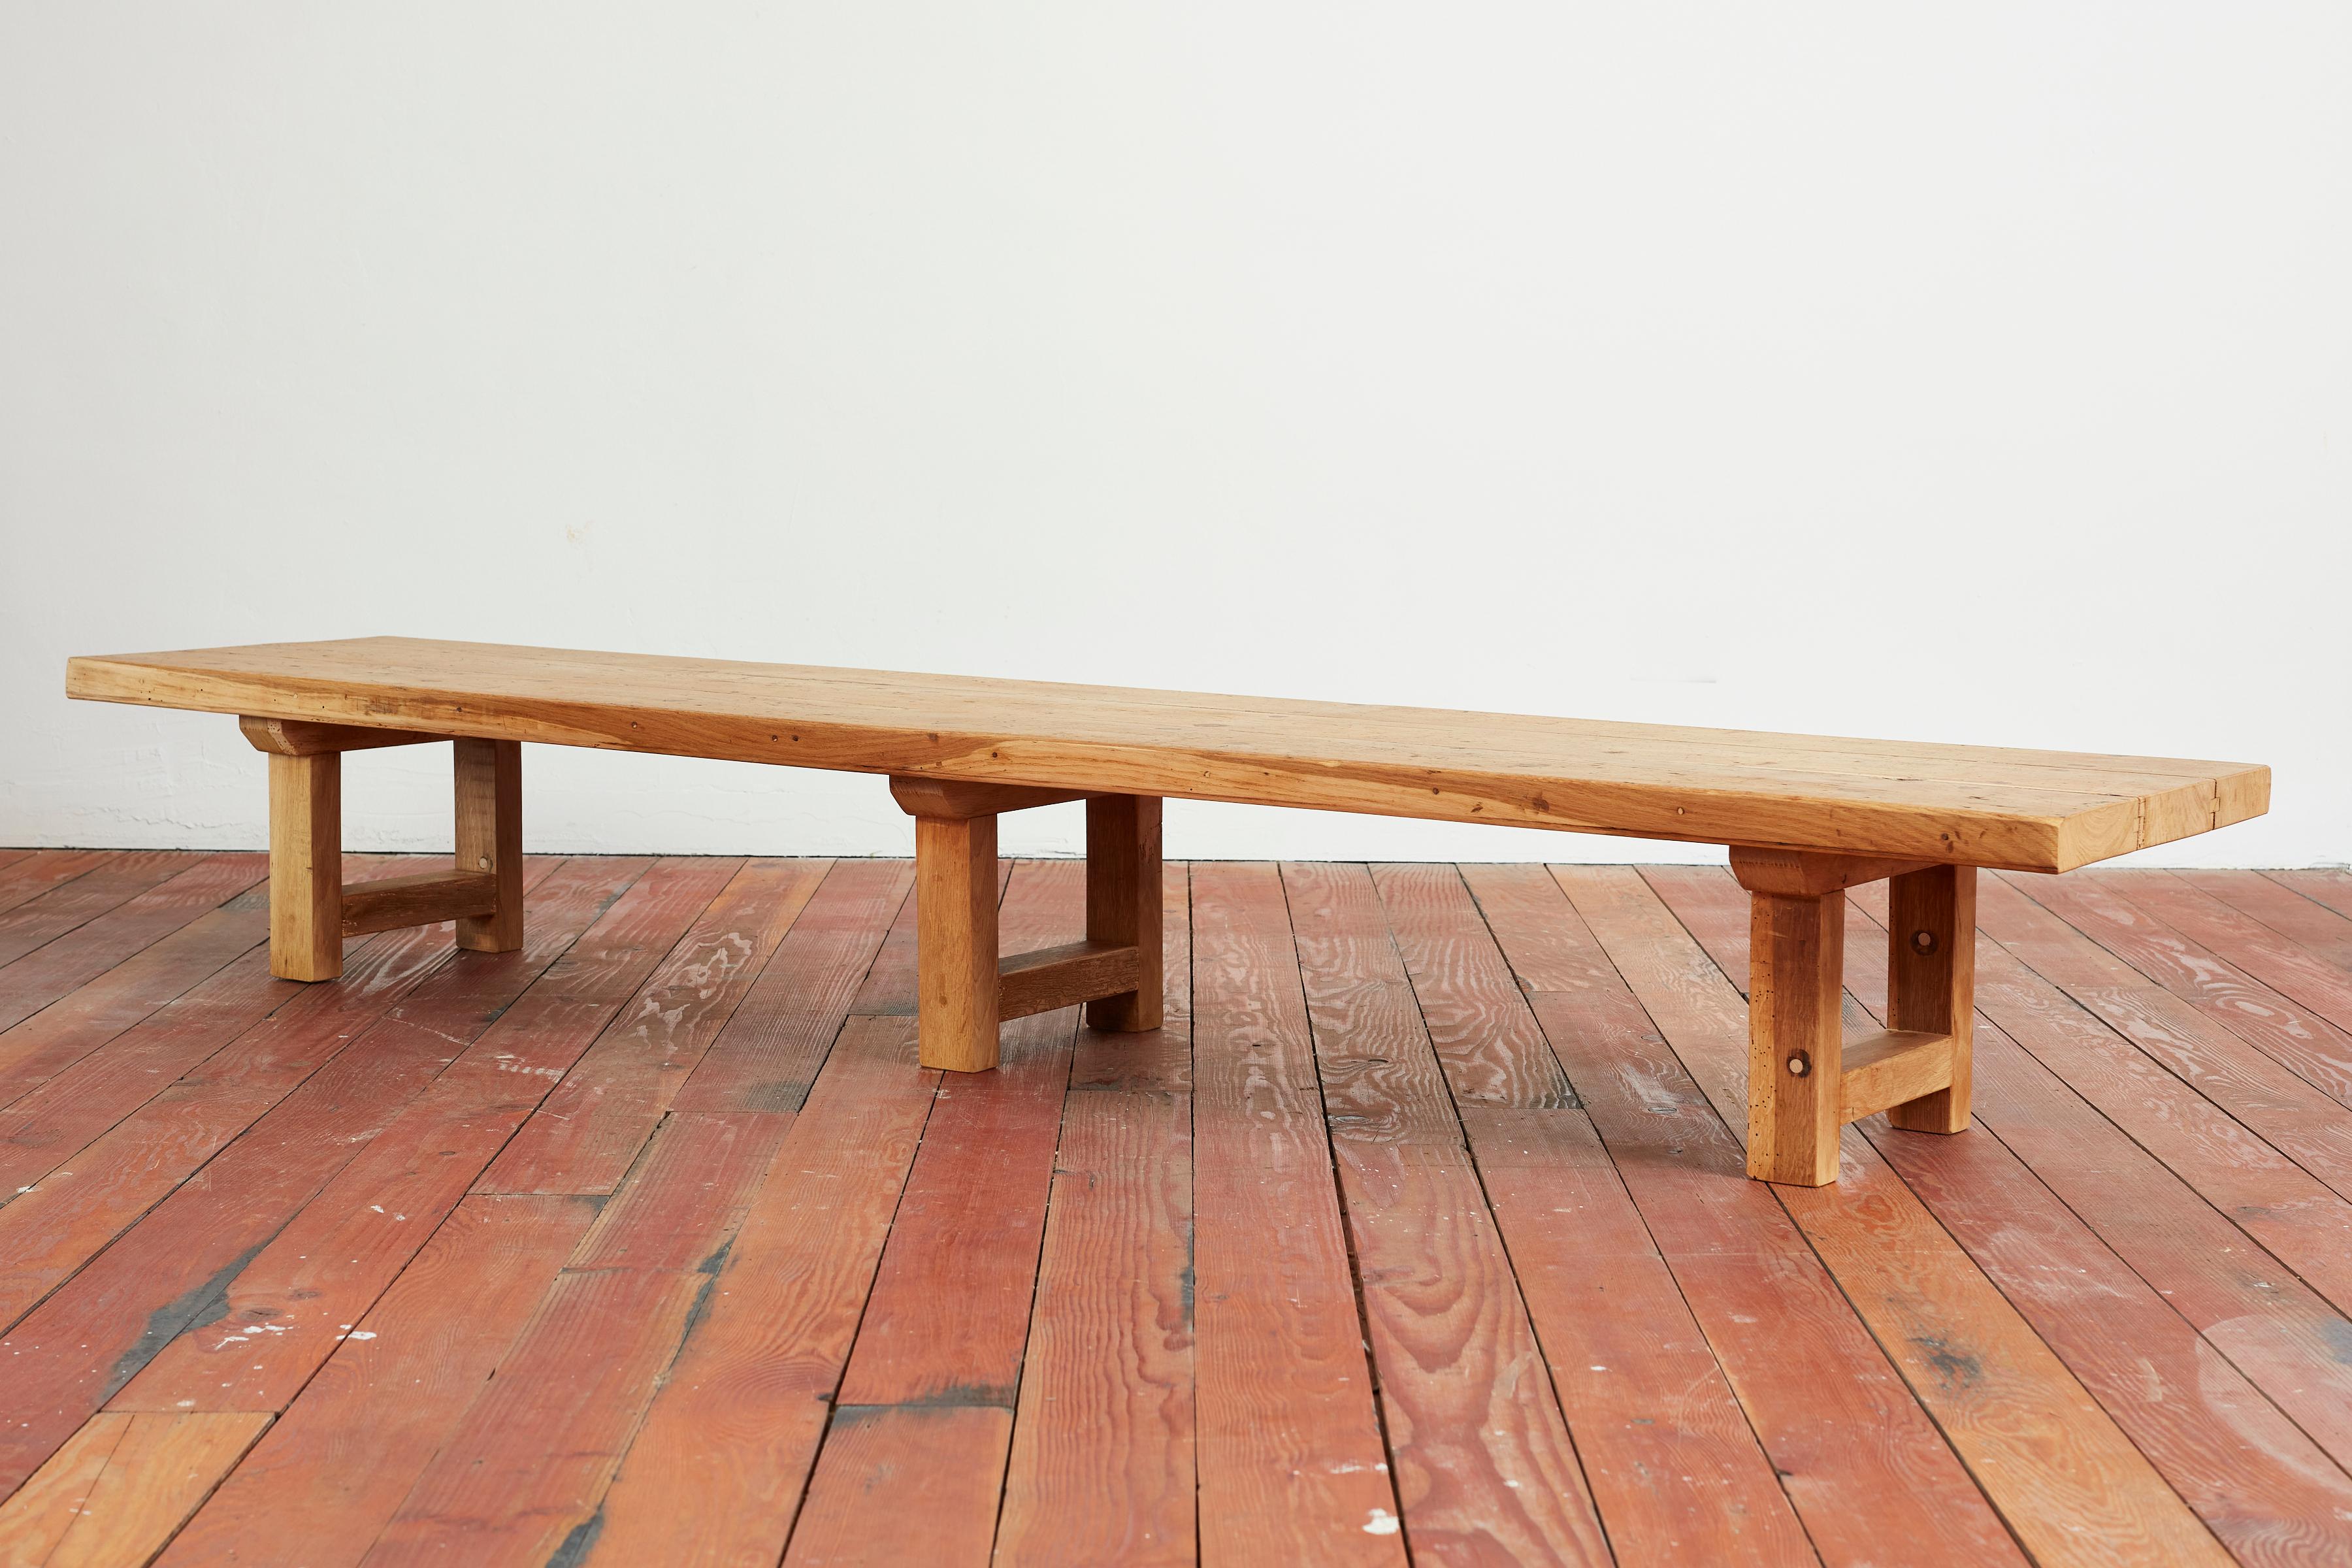 Fantastic old oak Bench - France, circa 1950s
Simple shape and large in scale 
Dovetail joinery - extremely well made.